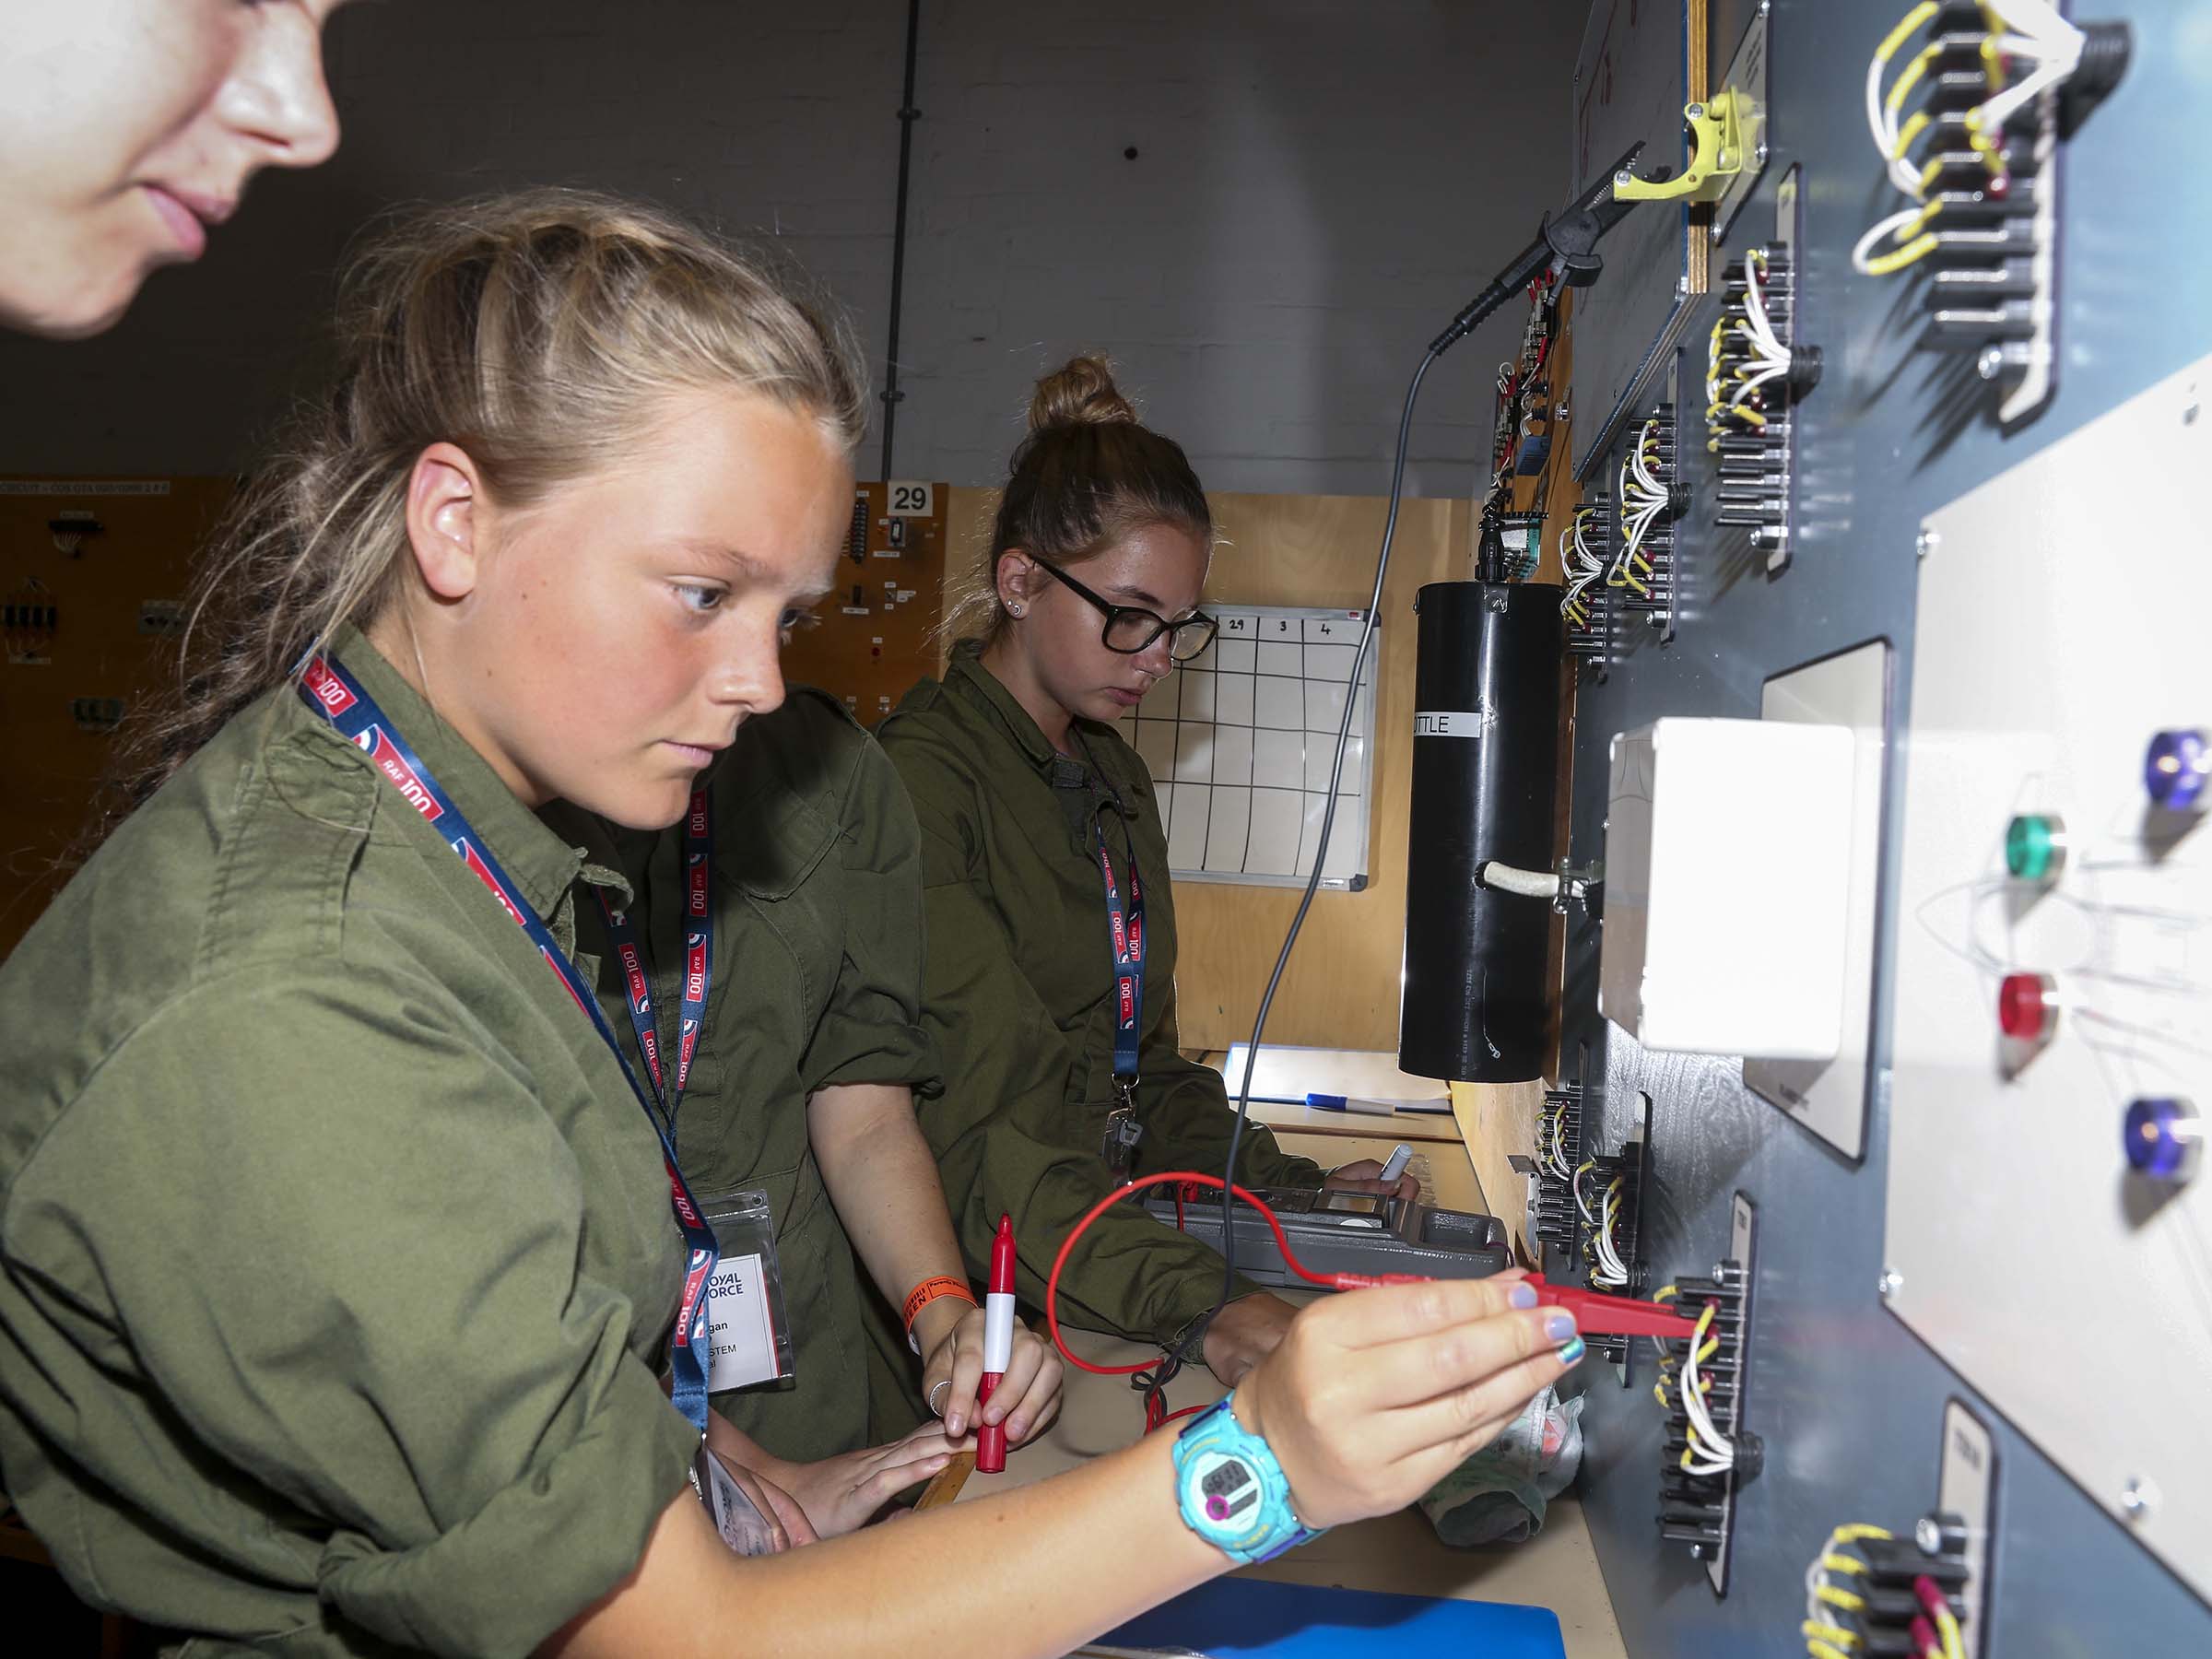 Image shows RAF Technicians wiring cables in a wall over a desk.